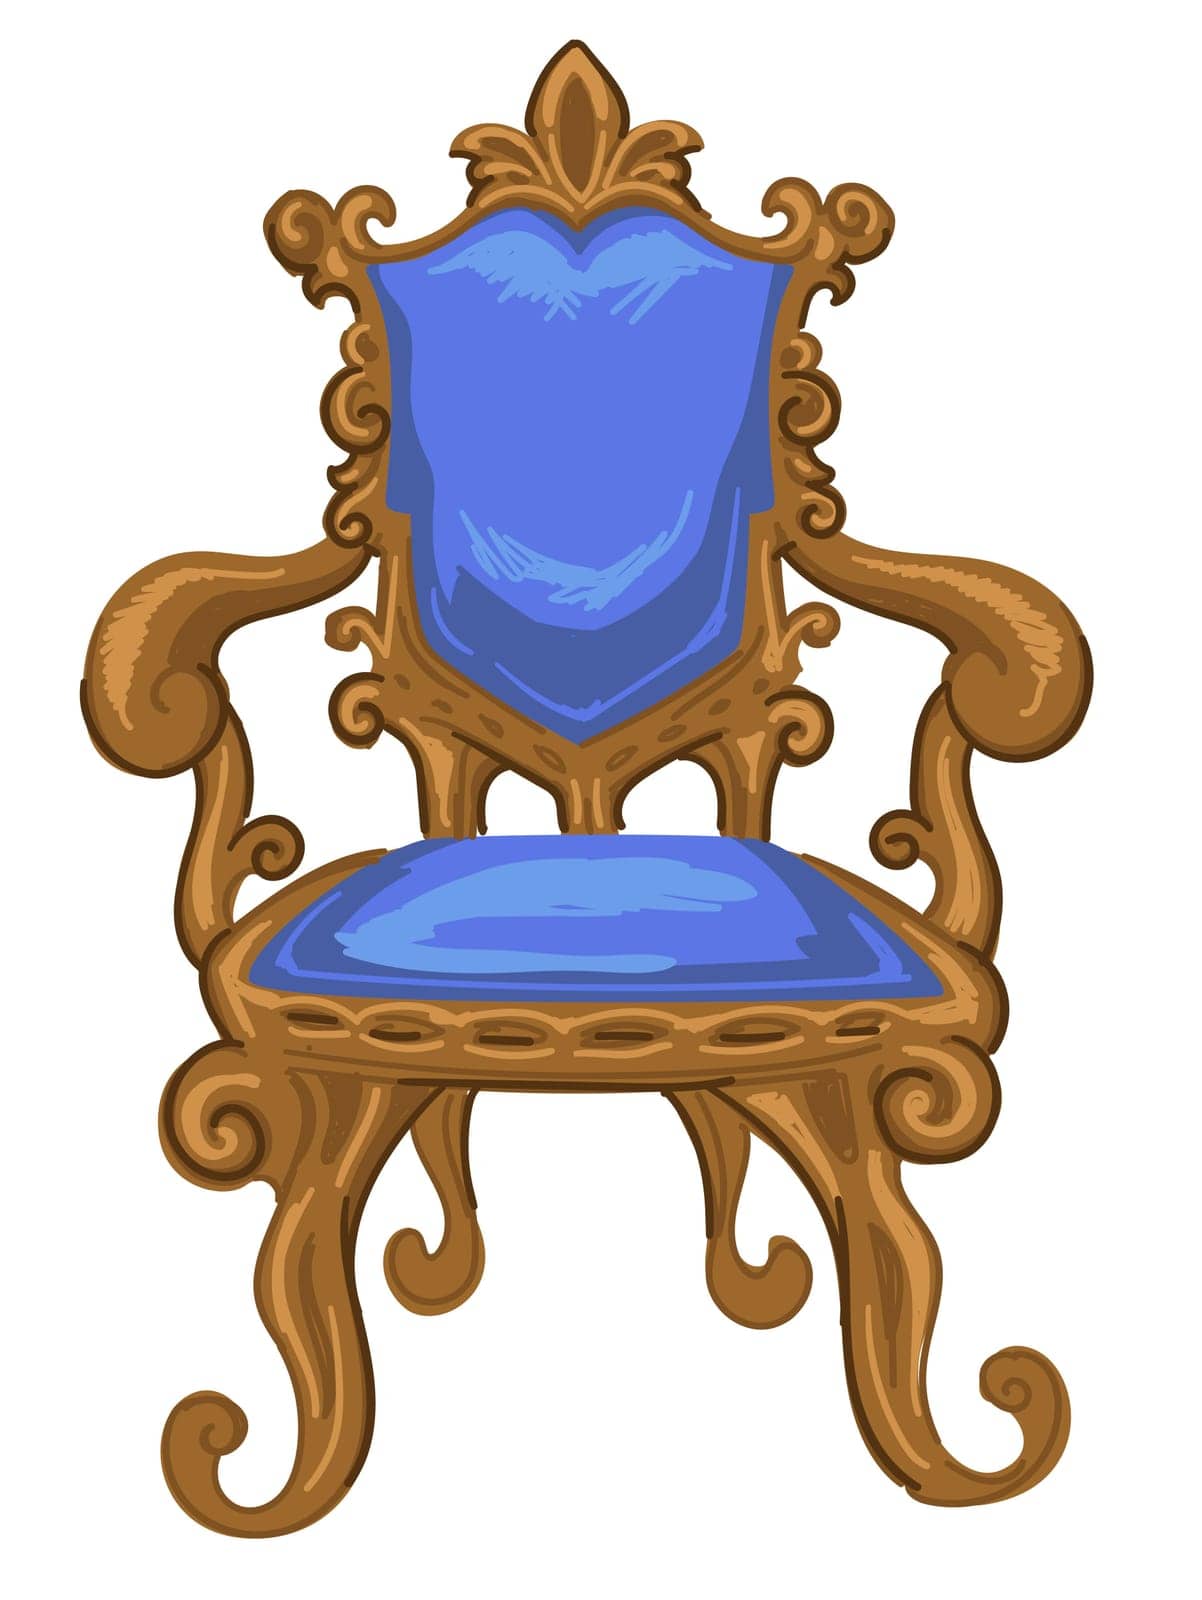 Retro chair with cloth for covering and carved ornaments. Isolated armchair for noble houses,baroque and rococo epoch. Elegant design of furniture for home, museum exponent. Vector in flat style